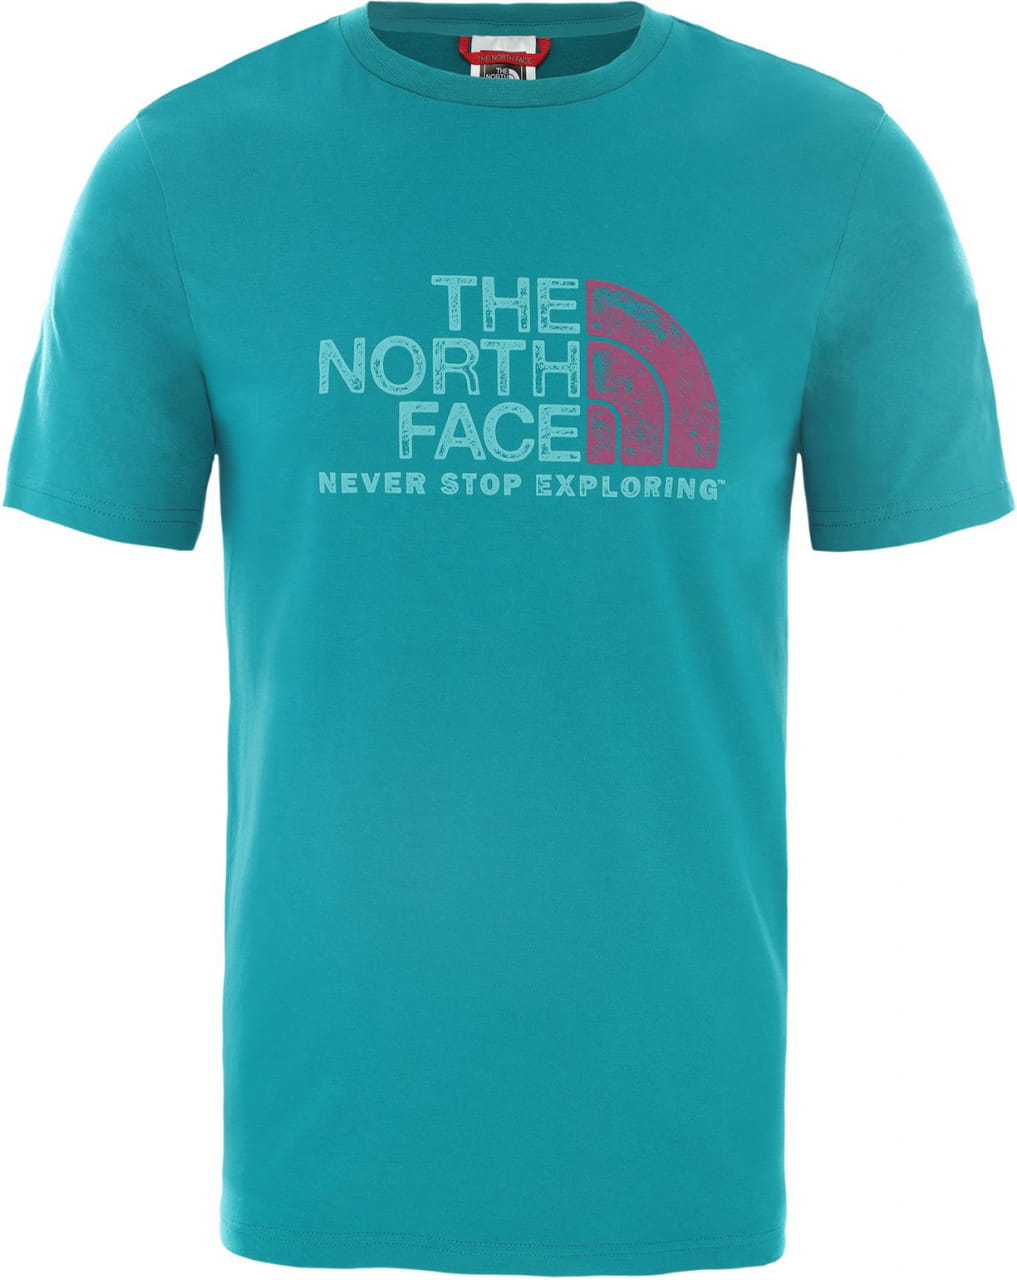 T-Shirts The North Face Men's Rust 2 T-Shirt